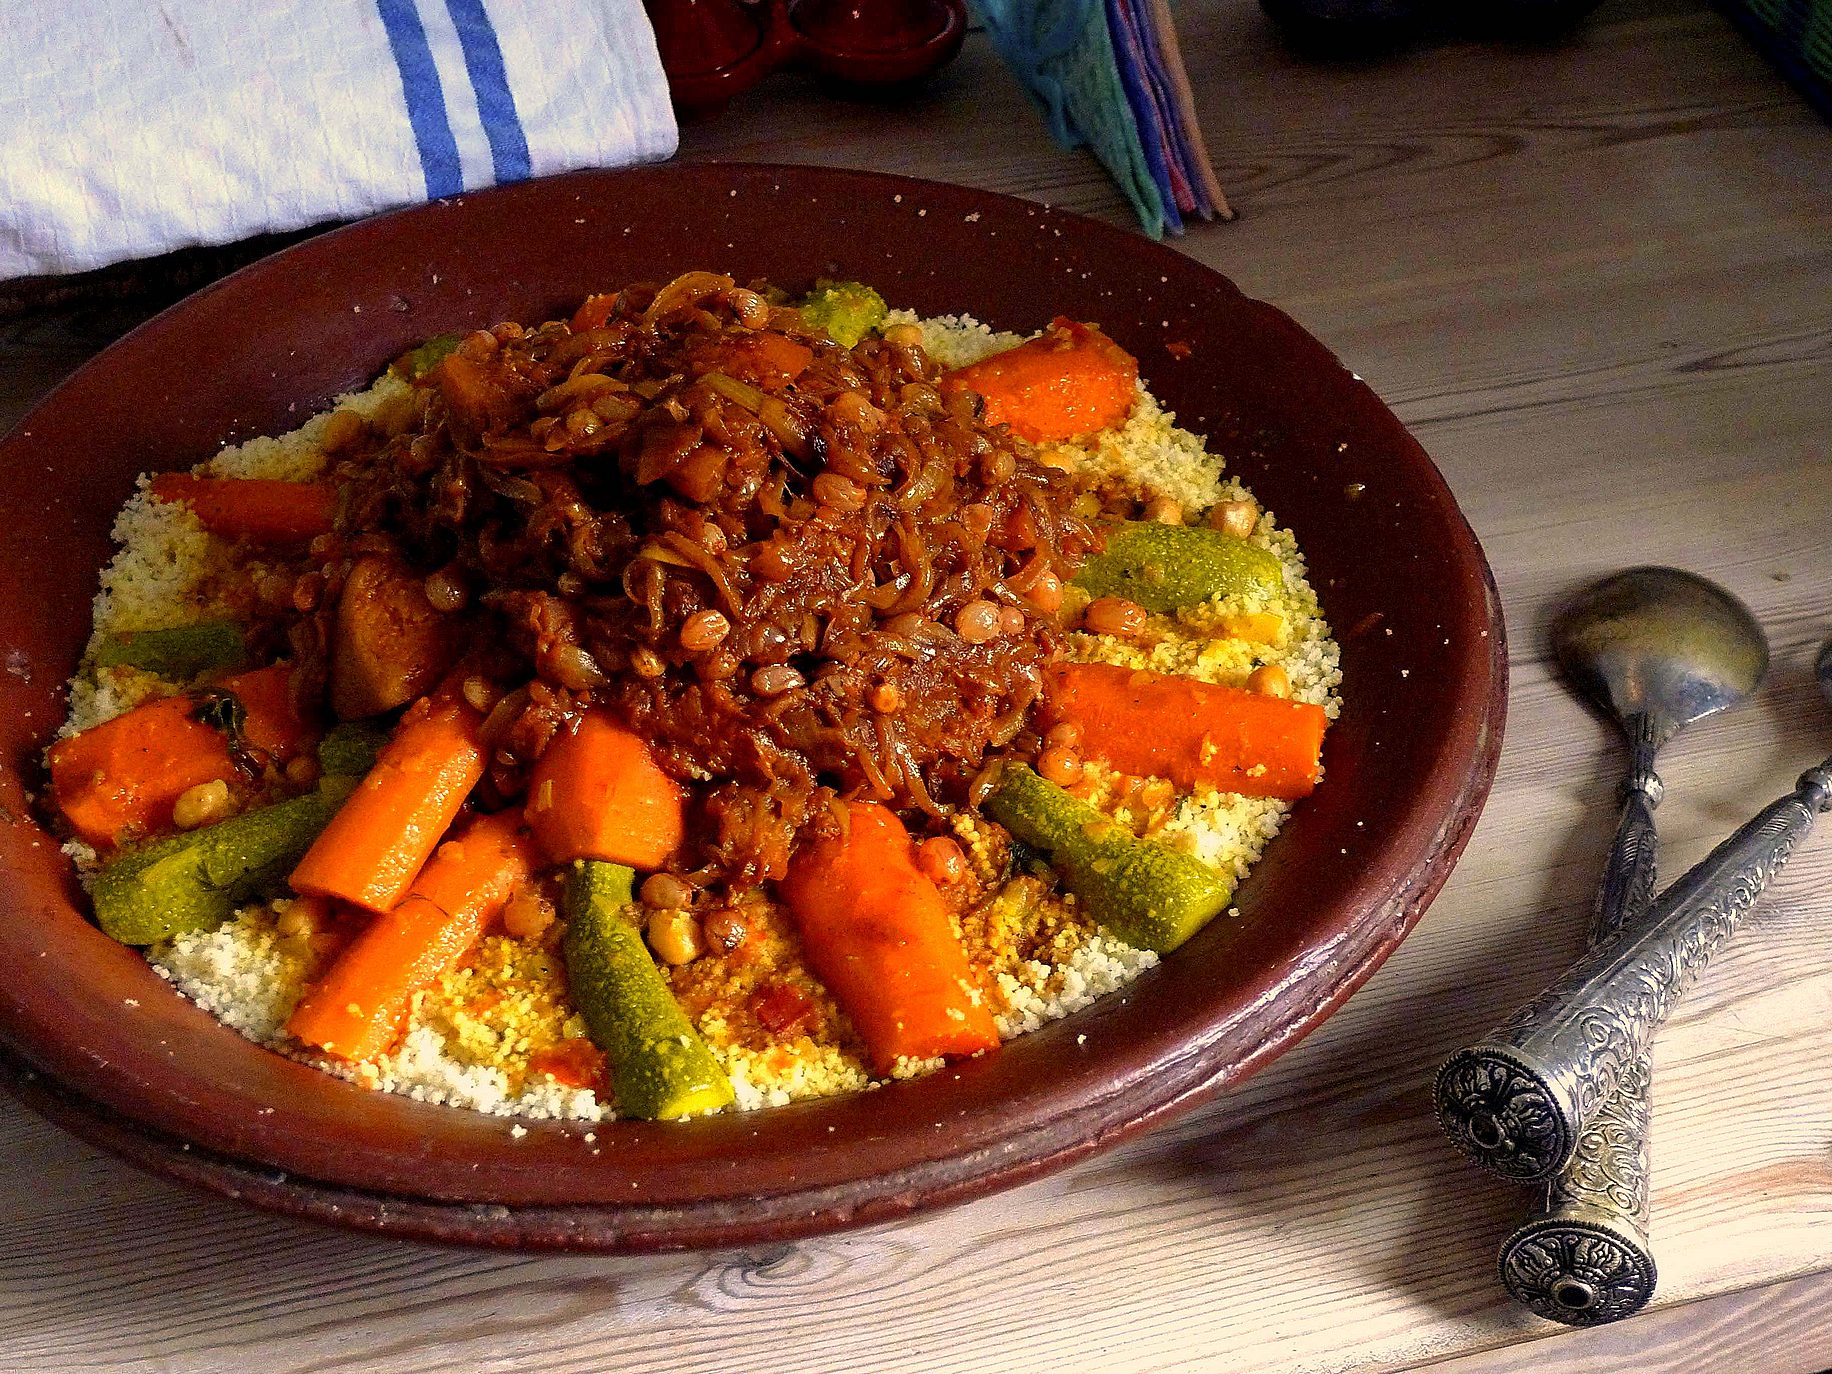 World on a Plate: couscous in Marrakech - Hungry Travelers